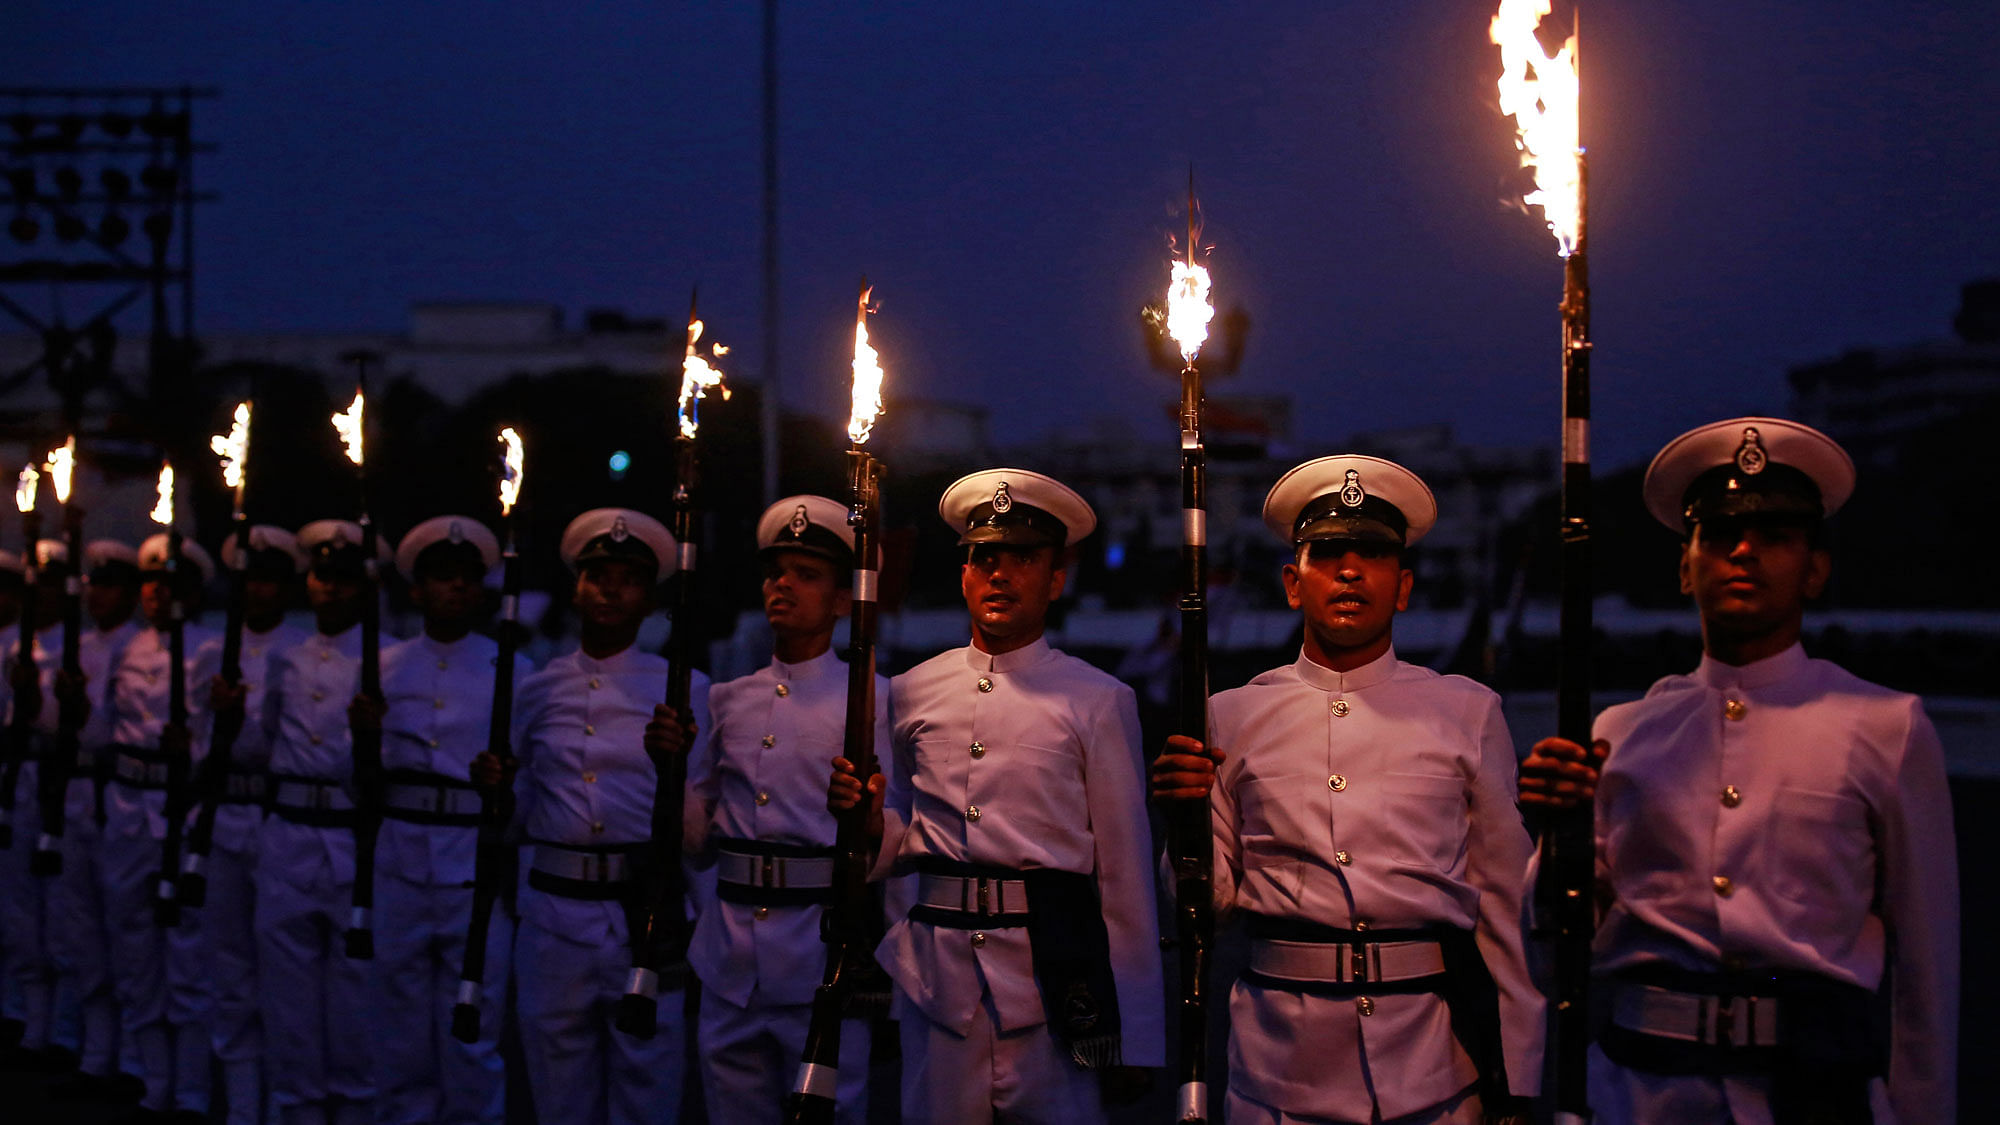 Indian Navy soldiers demonstrate their skills while holding their weapons during Navy Day celebrations&nbsp;